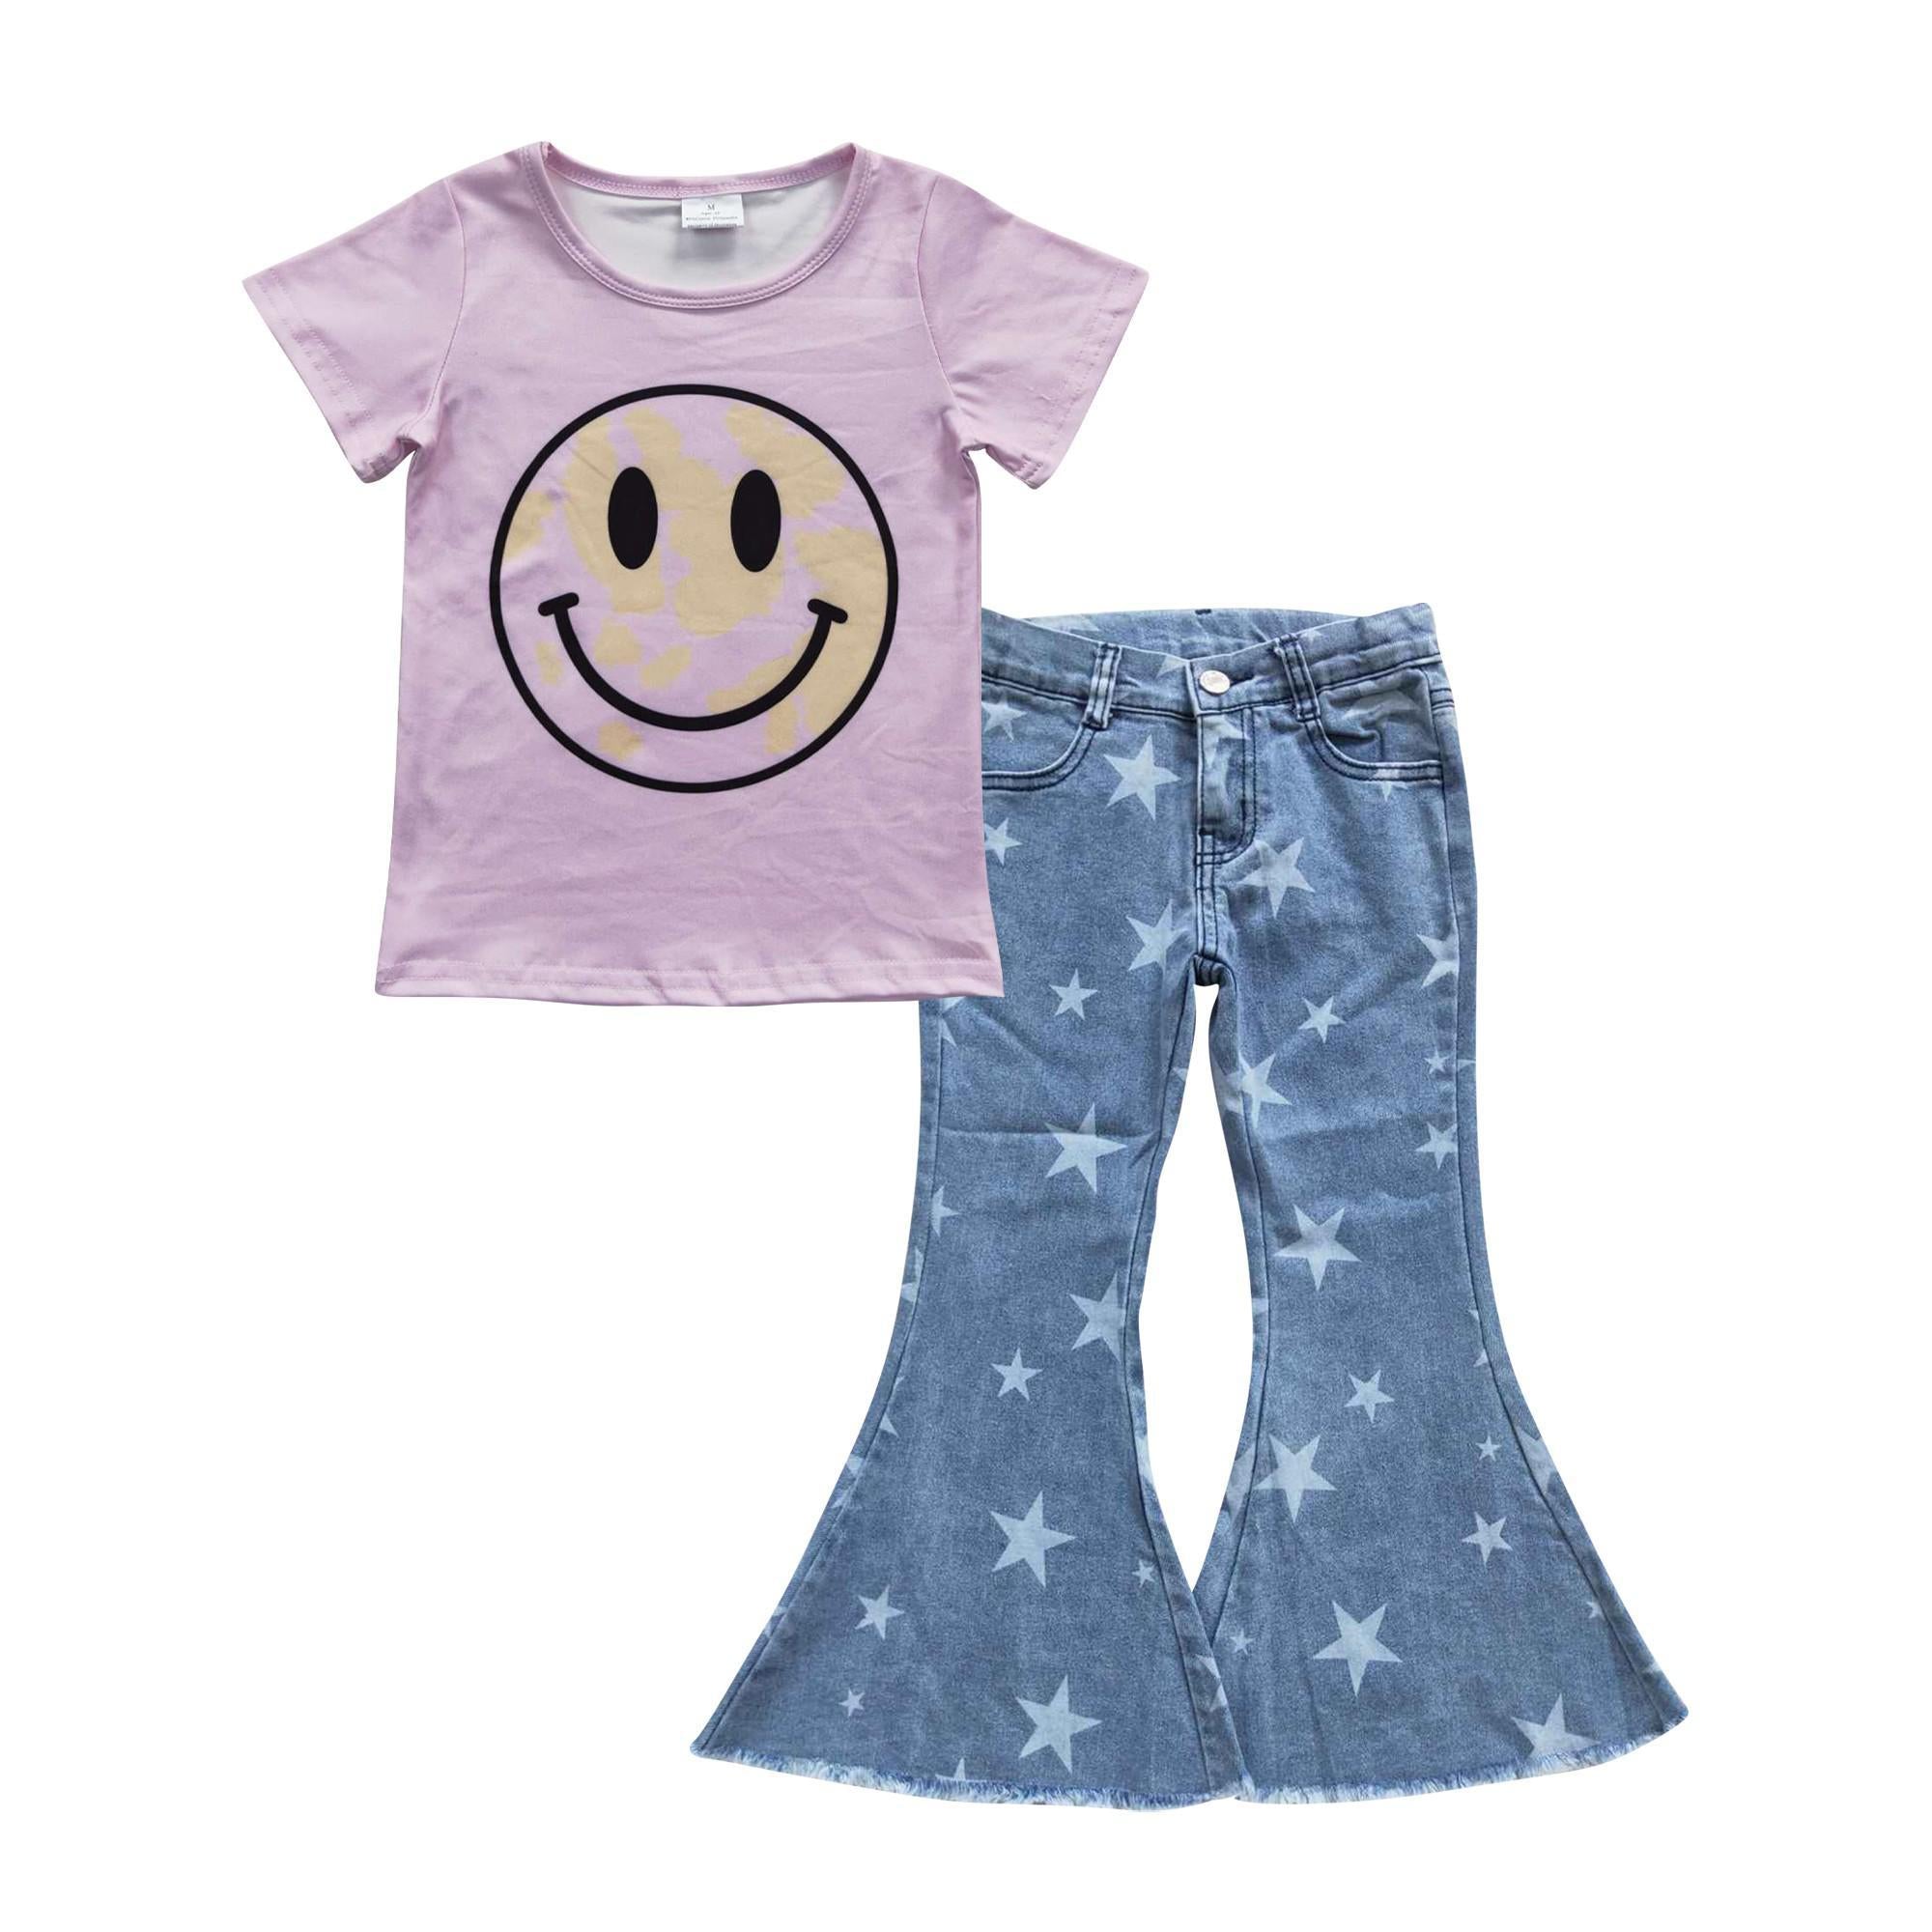 Yth Smile/Star Outfit